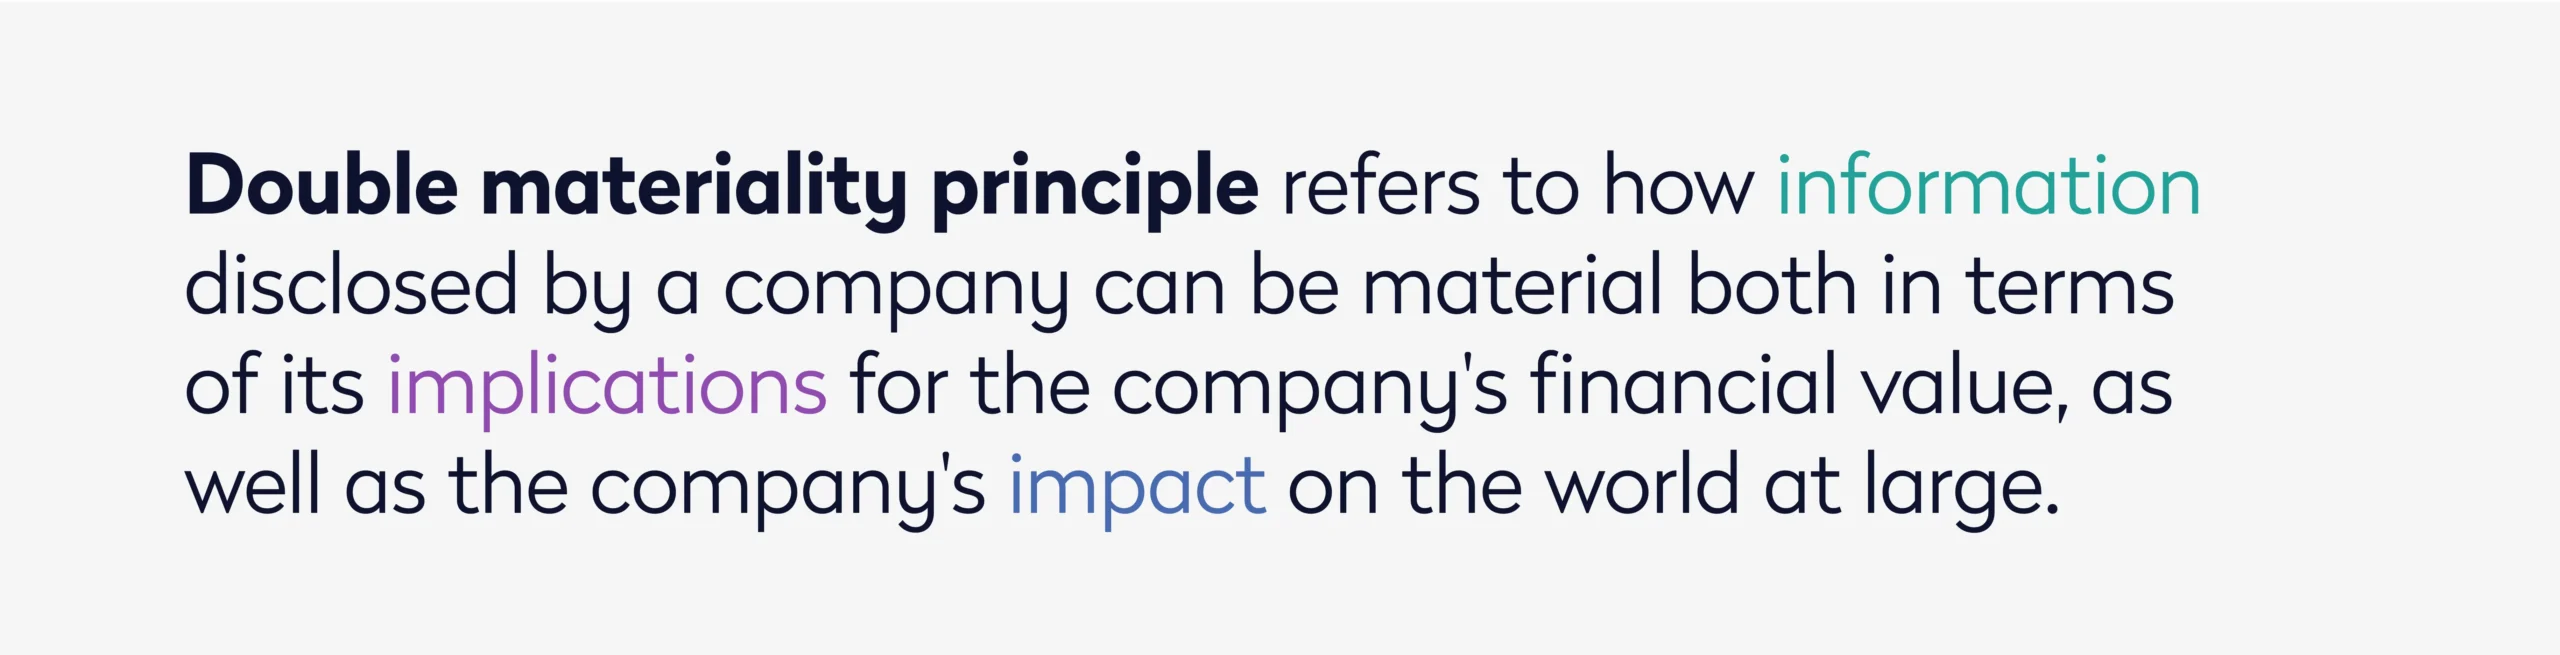 Double materiality principle